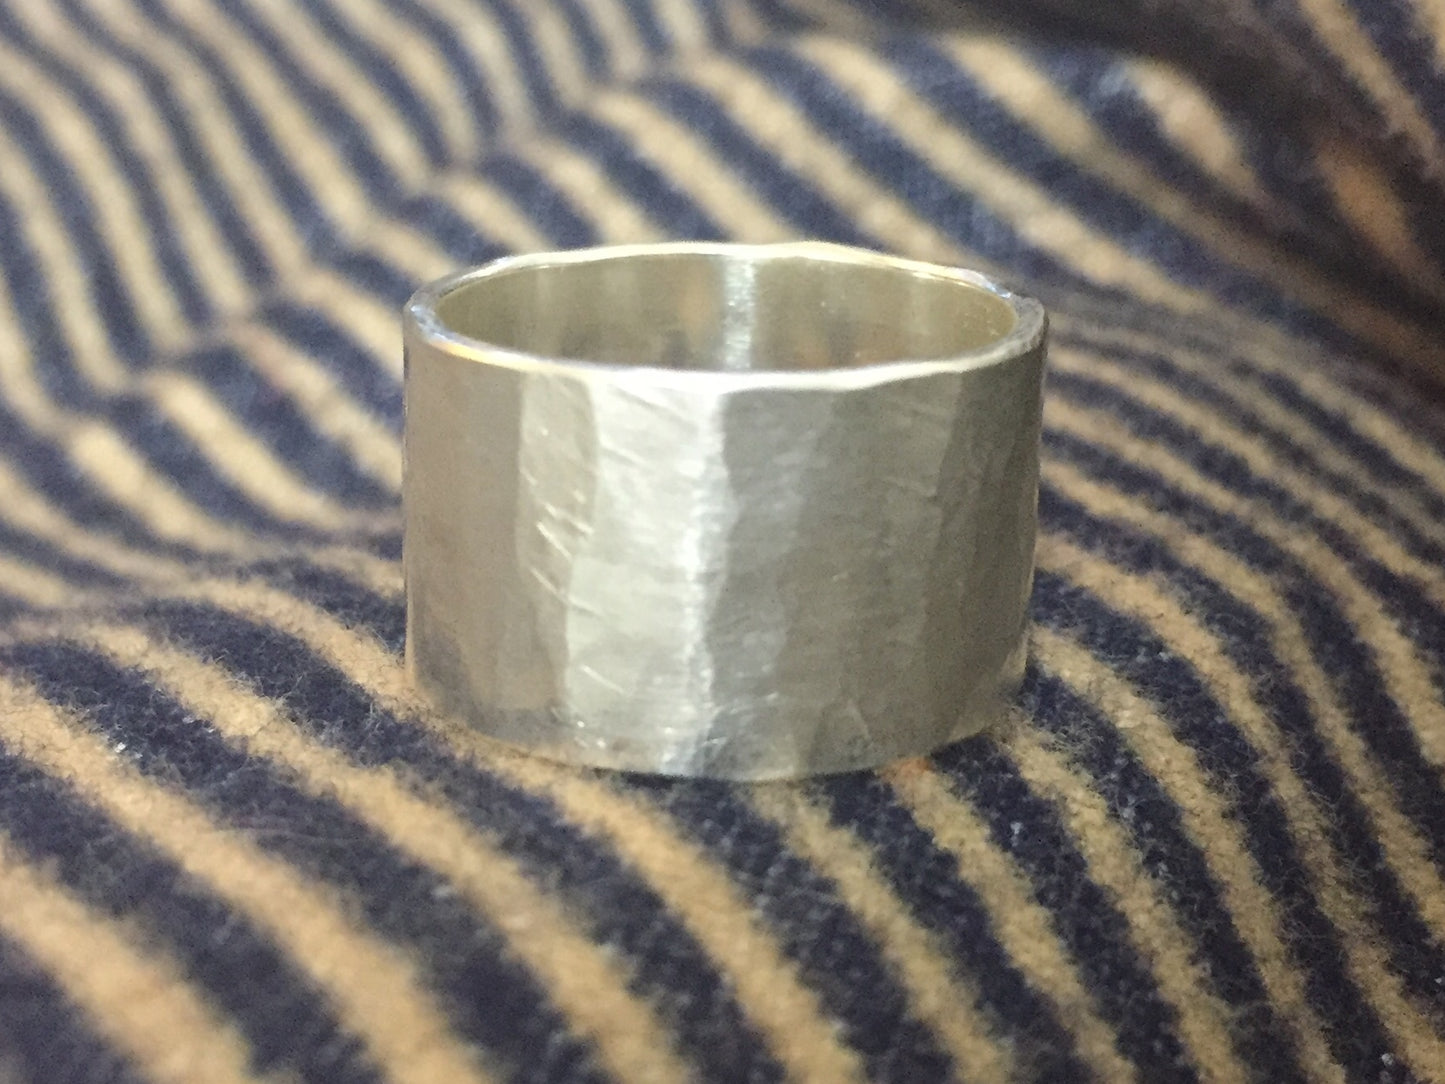 Hammered Sterling Silver925 Wide Ring / Band with Semi Matte For Men & Women ユニセックス・幅広・槌目・シルバーリング・バンド